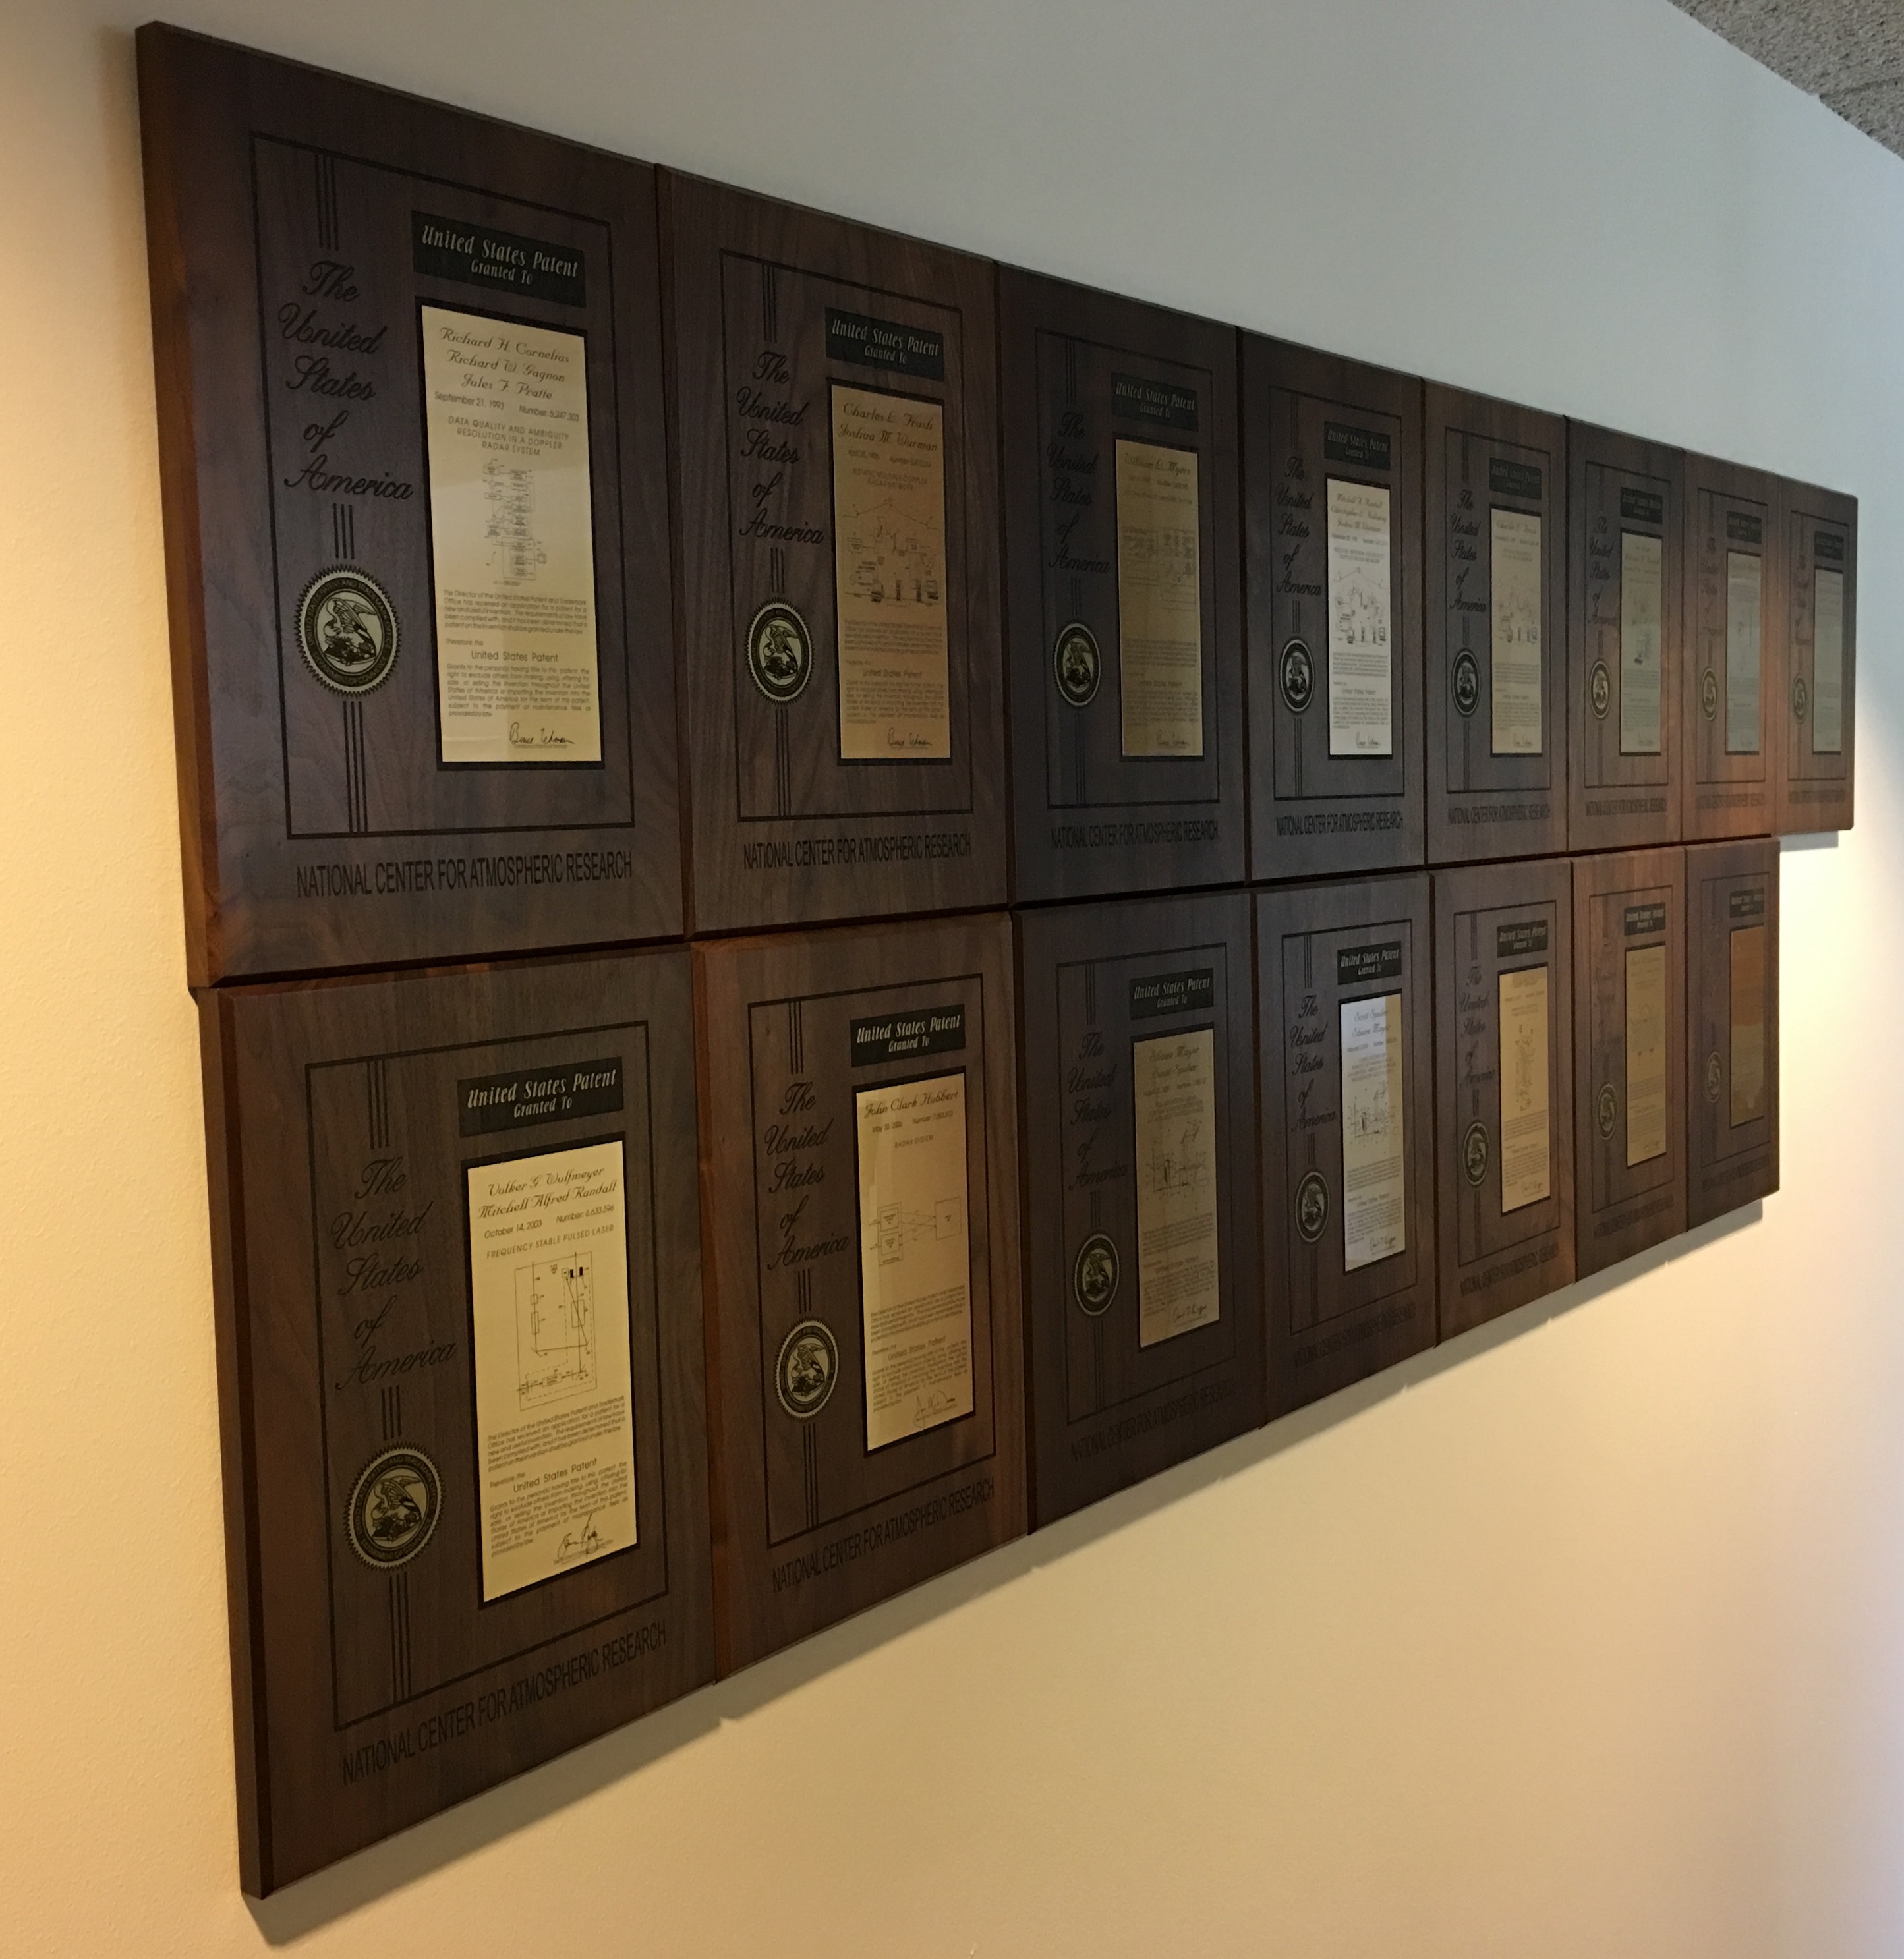 Many patent placards hanging on the wall.